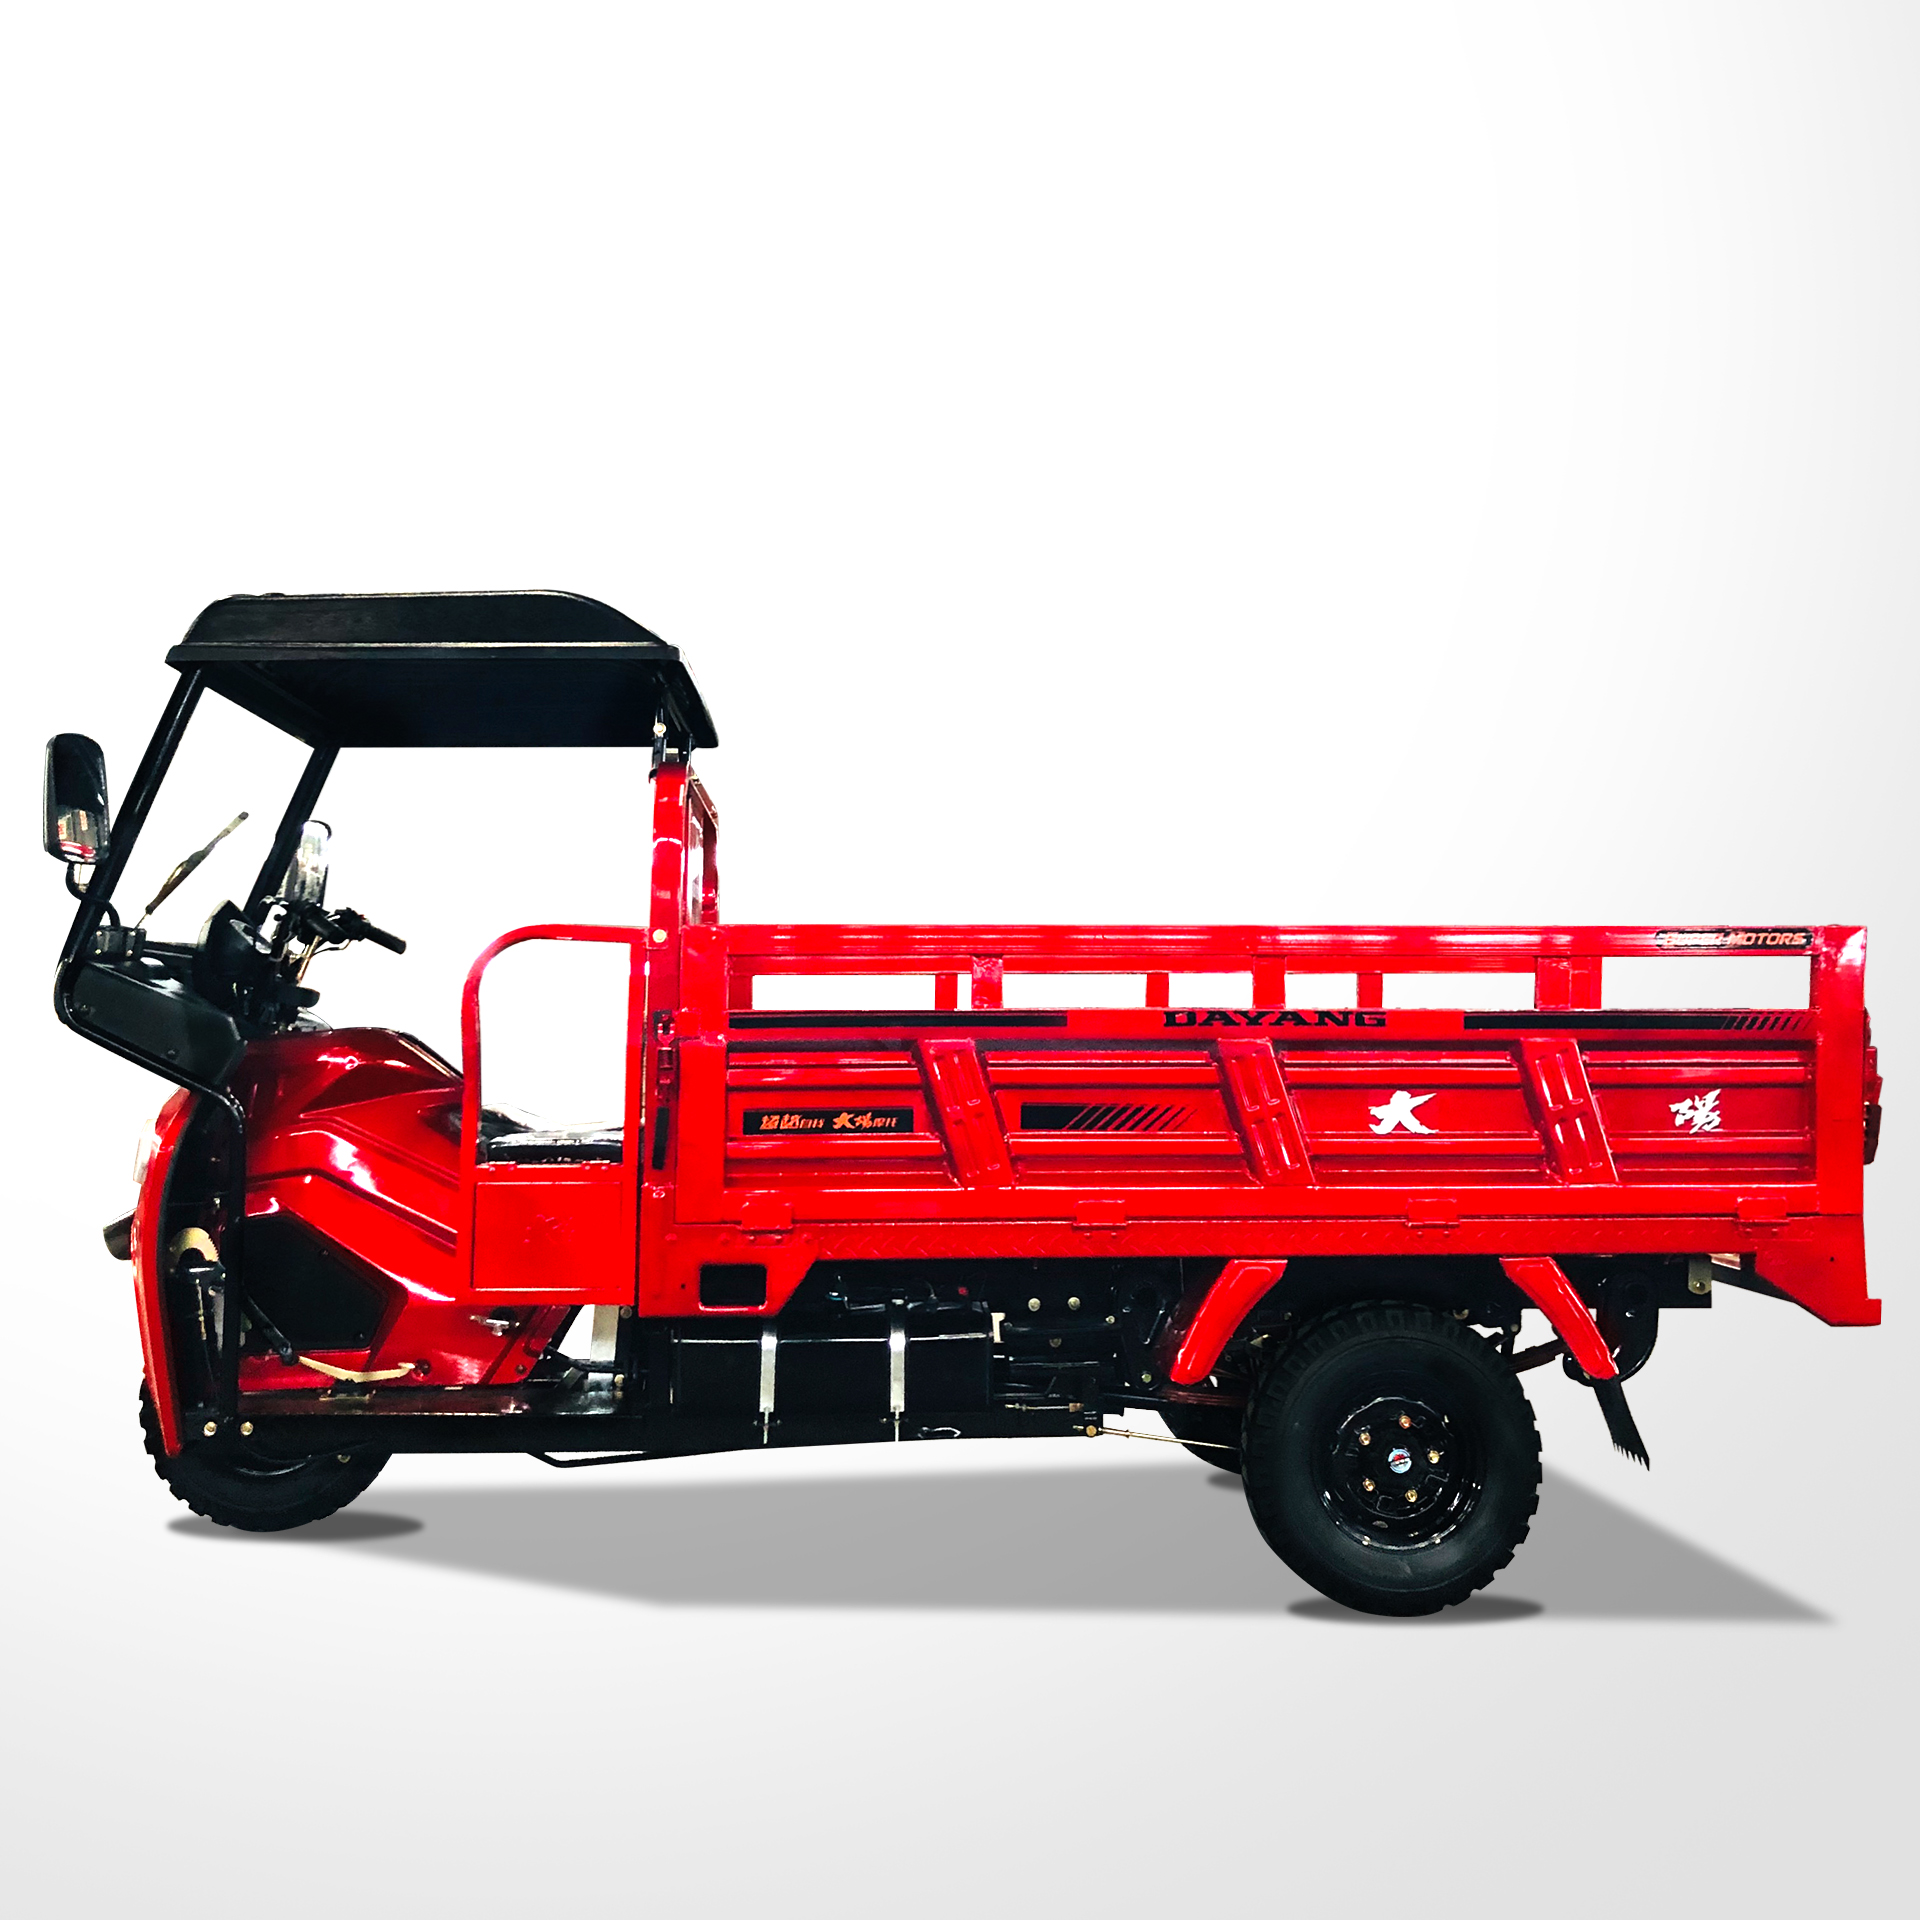 M2 Hot-selling truck cargo tricycle with powerful engine of 200cc/250cc/300cc